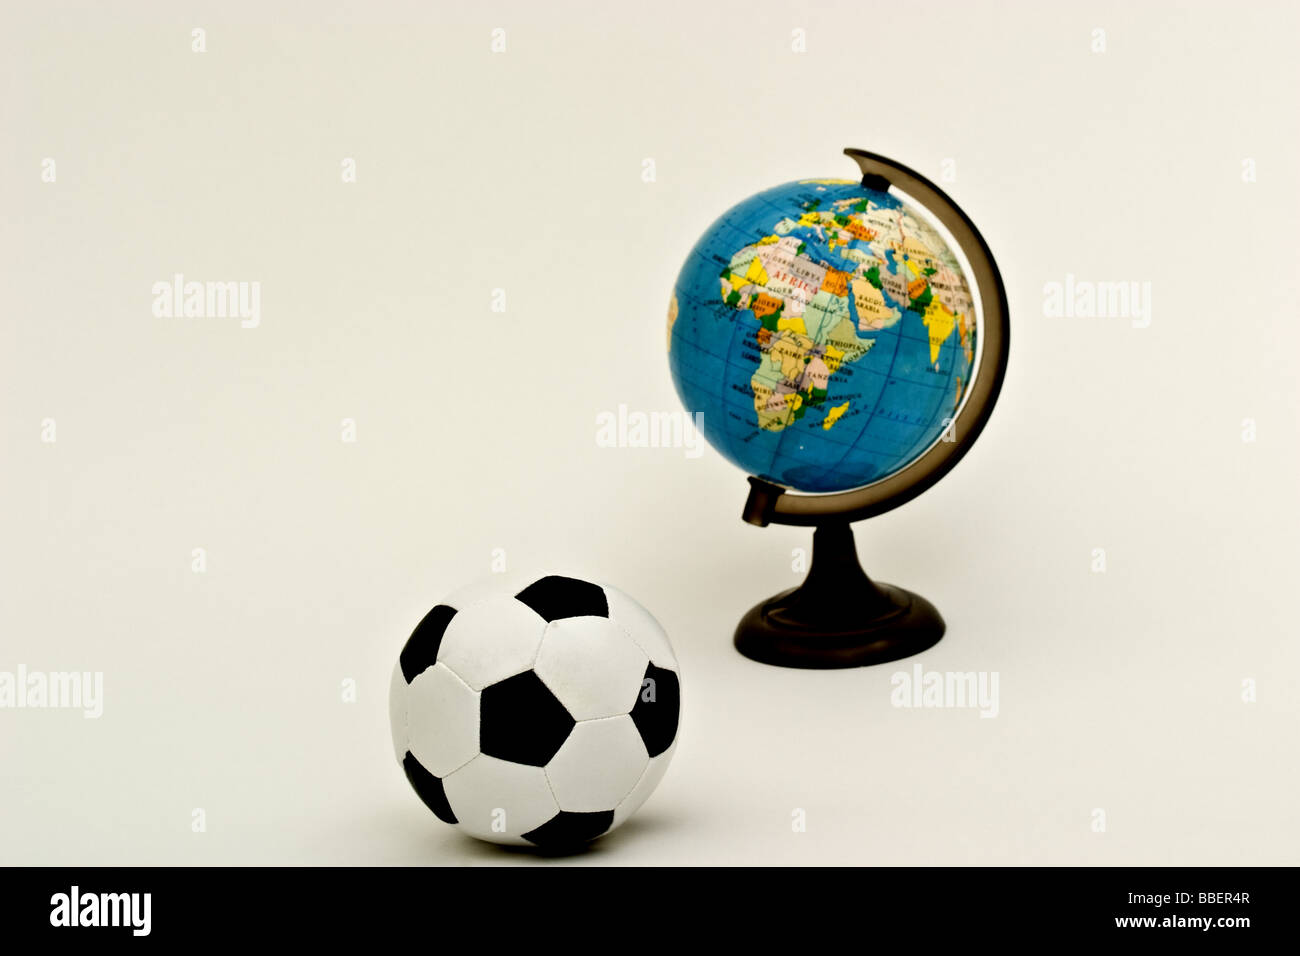 Soccer ball in front of a small globe of the world Stock Photo